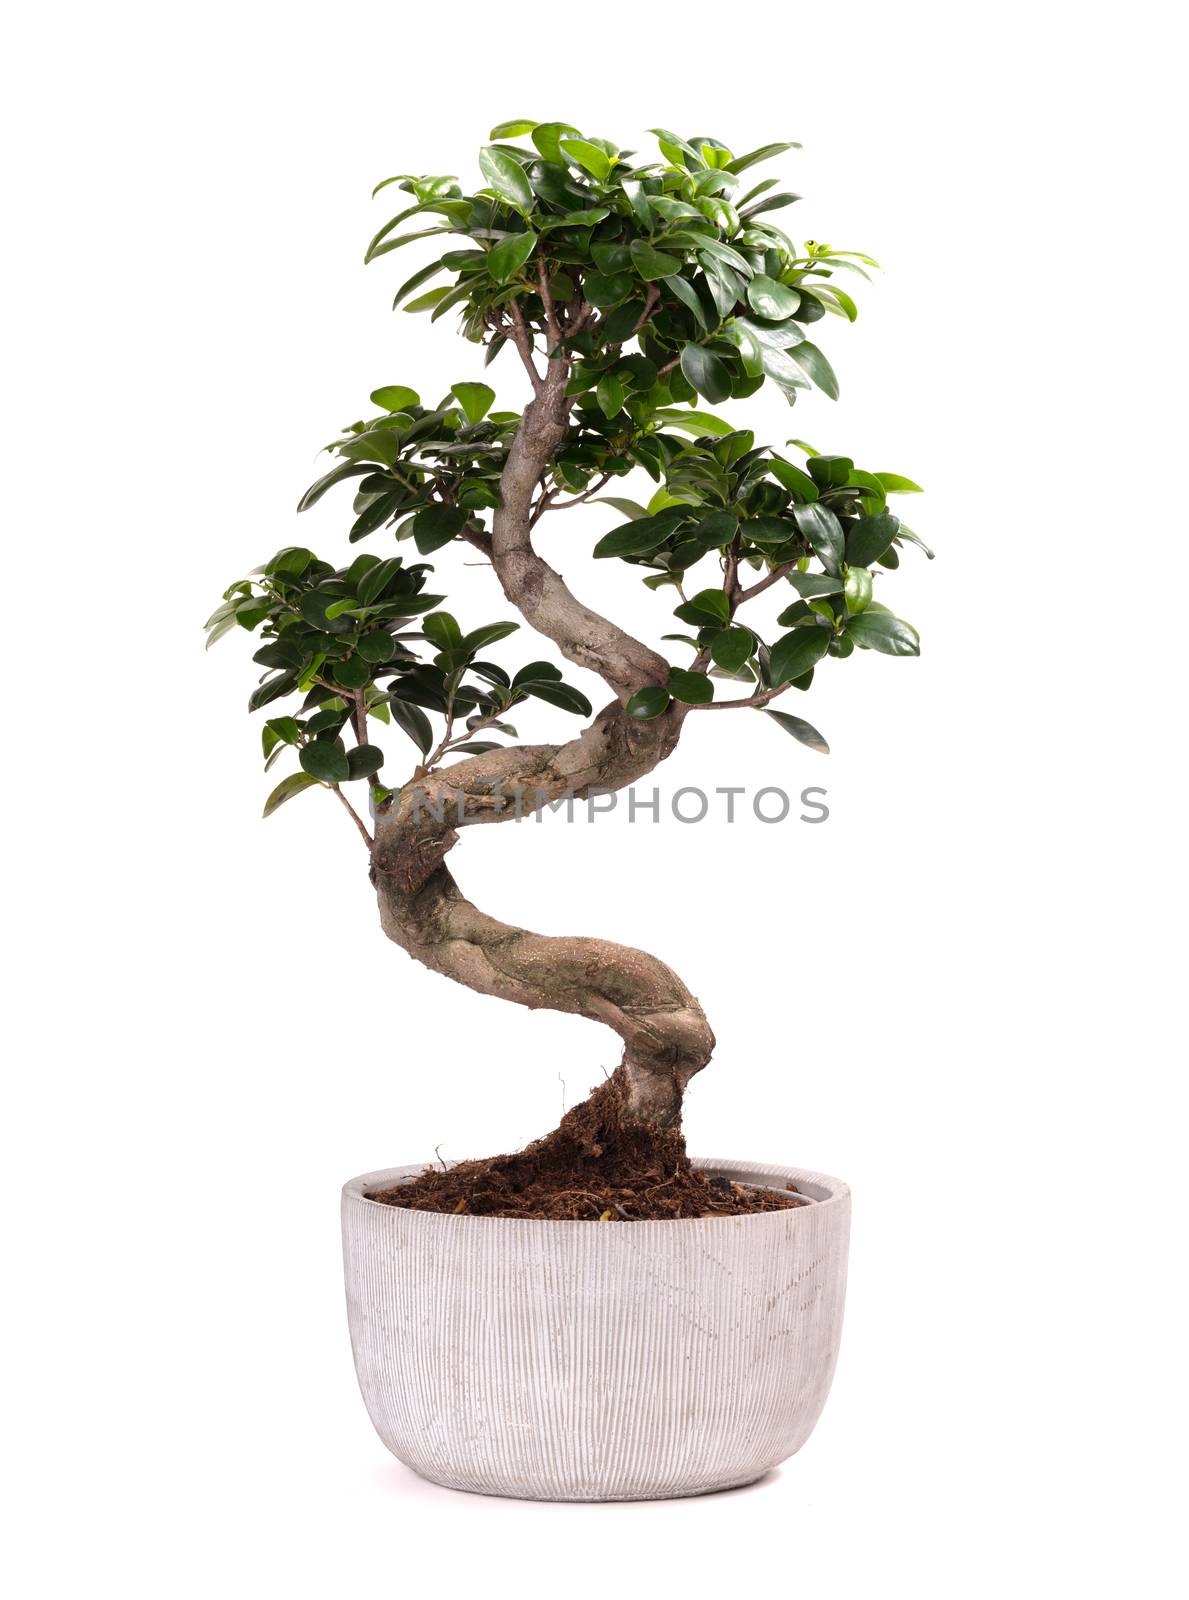 Bonsai tree potted plant, isolated on white